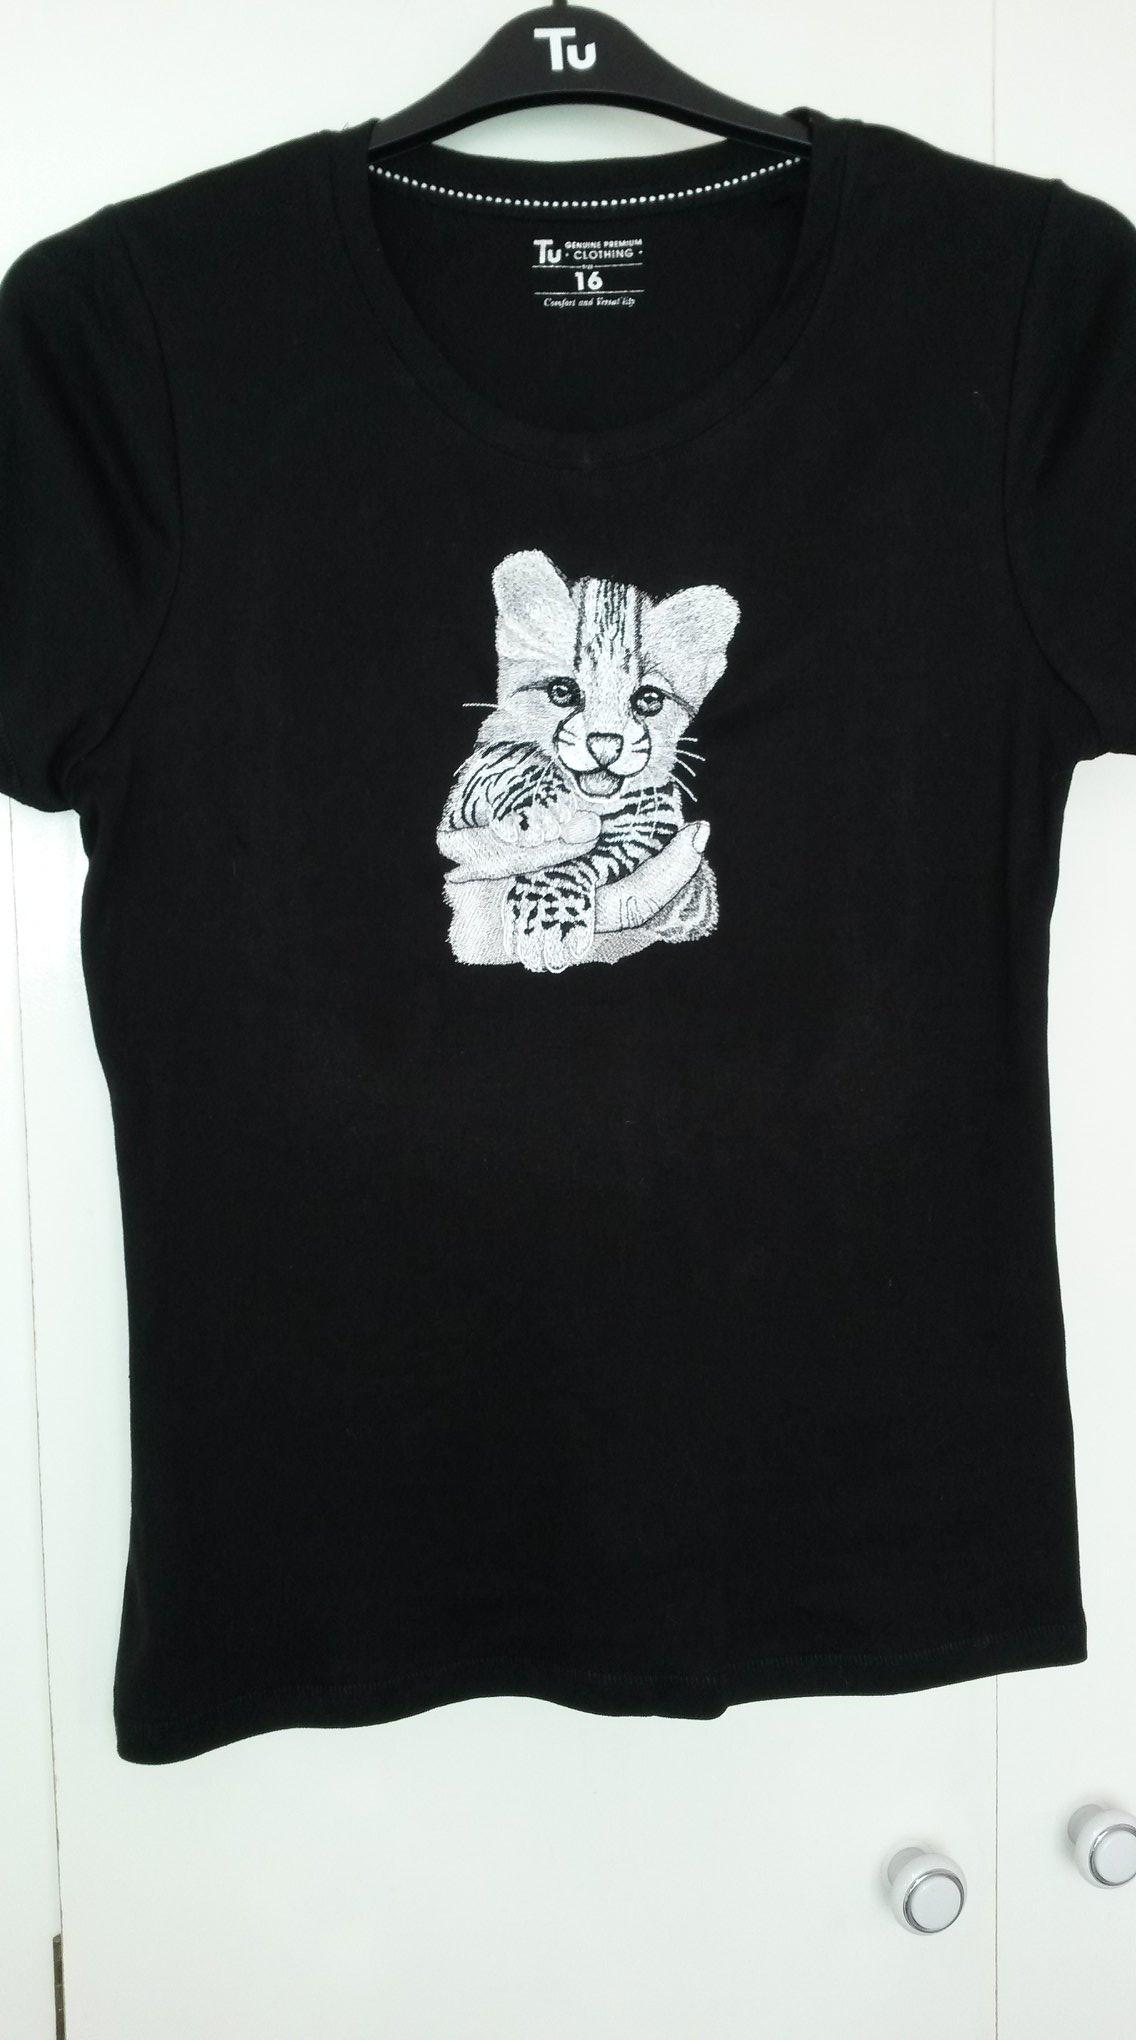 Embroidered t-shirt with baby cheetah design